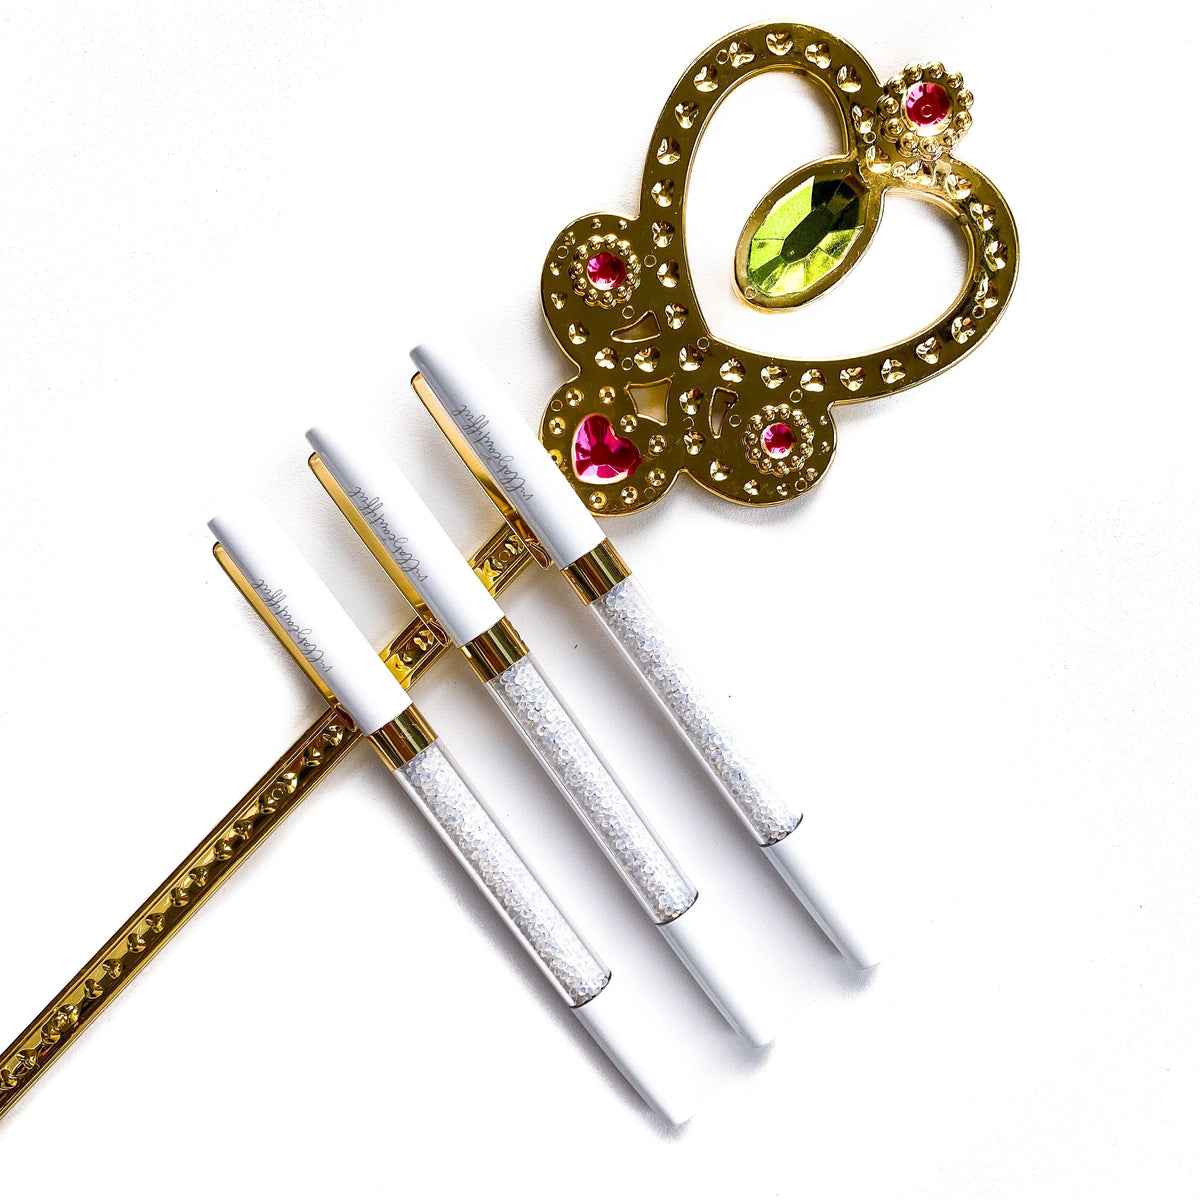 Once Upon A Time Imperfect Crystal VBPen | limited kit pen